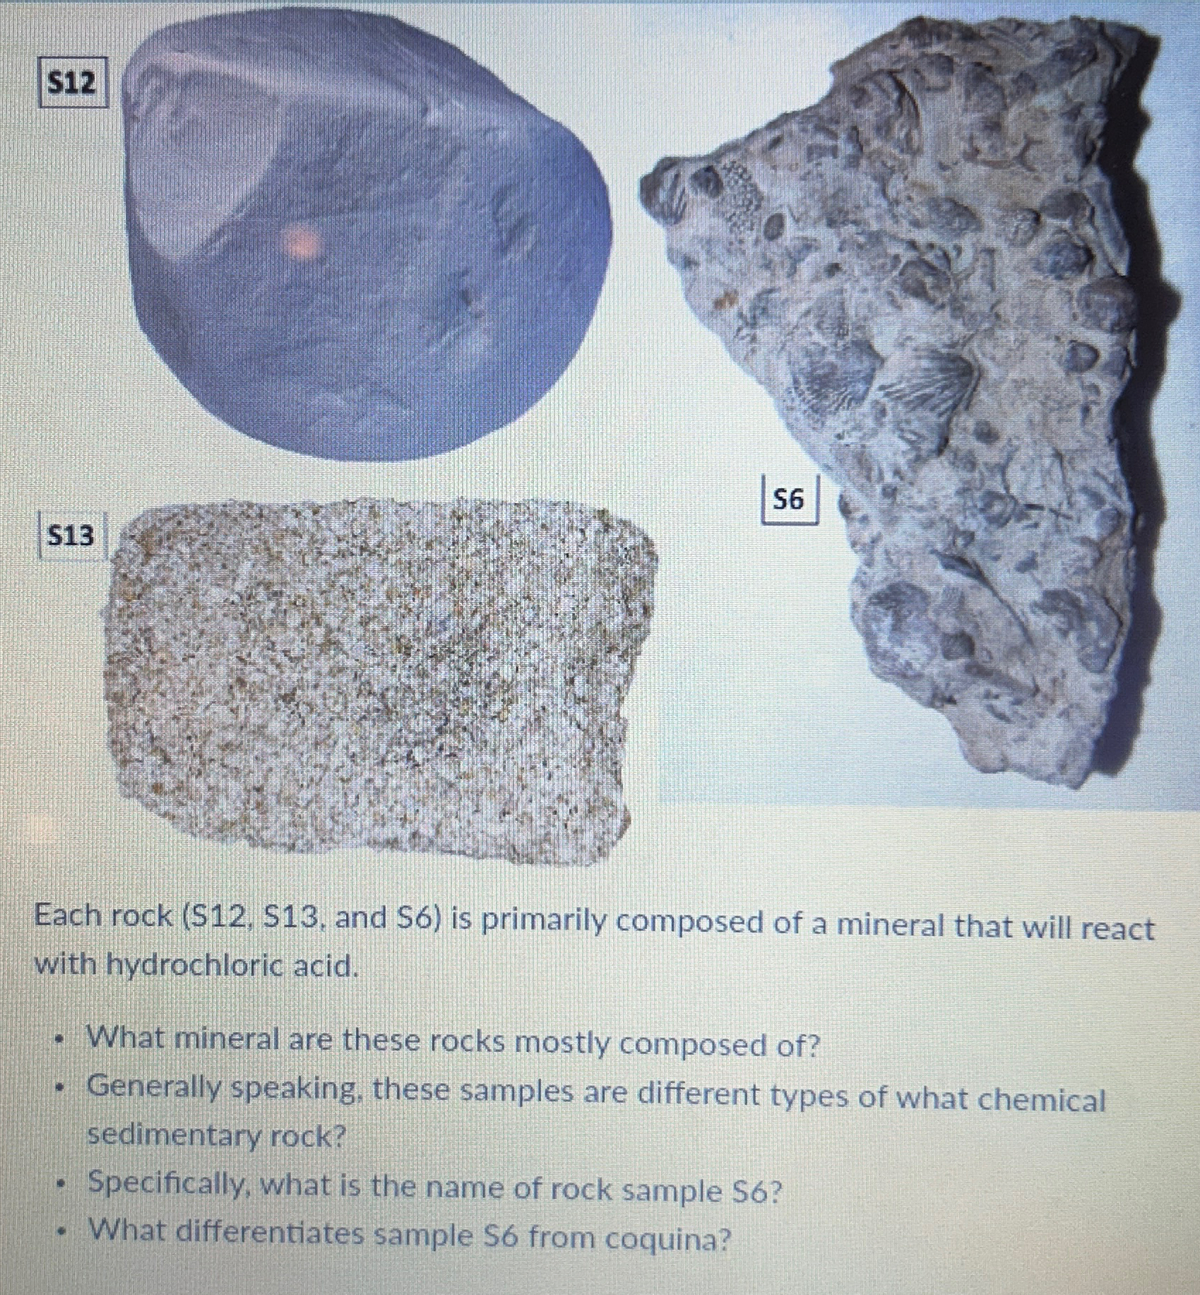 $12
$13
S6
Each rock (S12, S13, and S6) is primarily composed of a mineral that will react
with hydrochloric acid.
. What mineral are these rocks mostly composed of?
Generally speaking, these samples are different types of what chemical
sedimentary rock?
Specifically, what is the name of rock sample $6?
. What differentiates sample S6 from coquina?